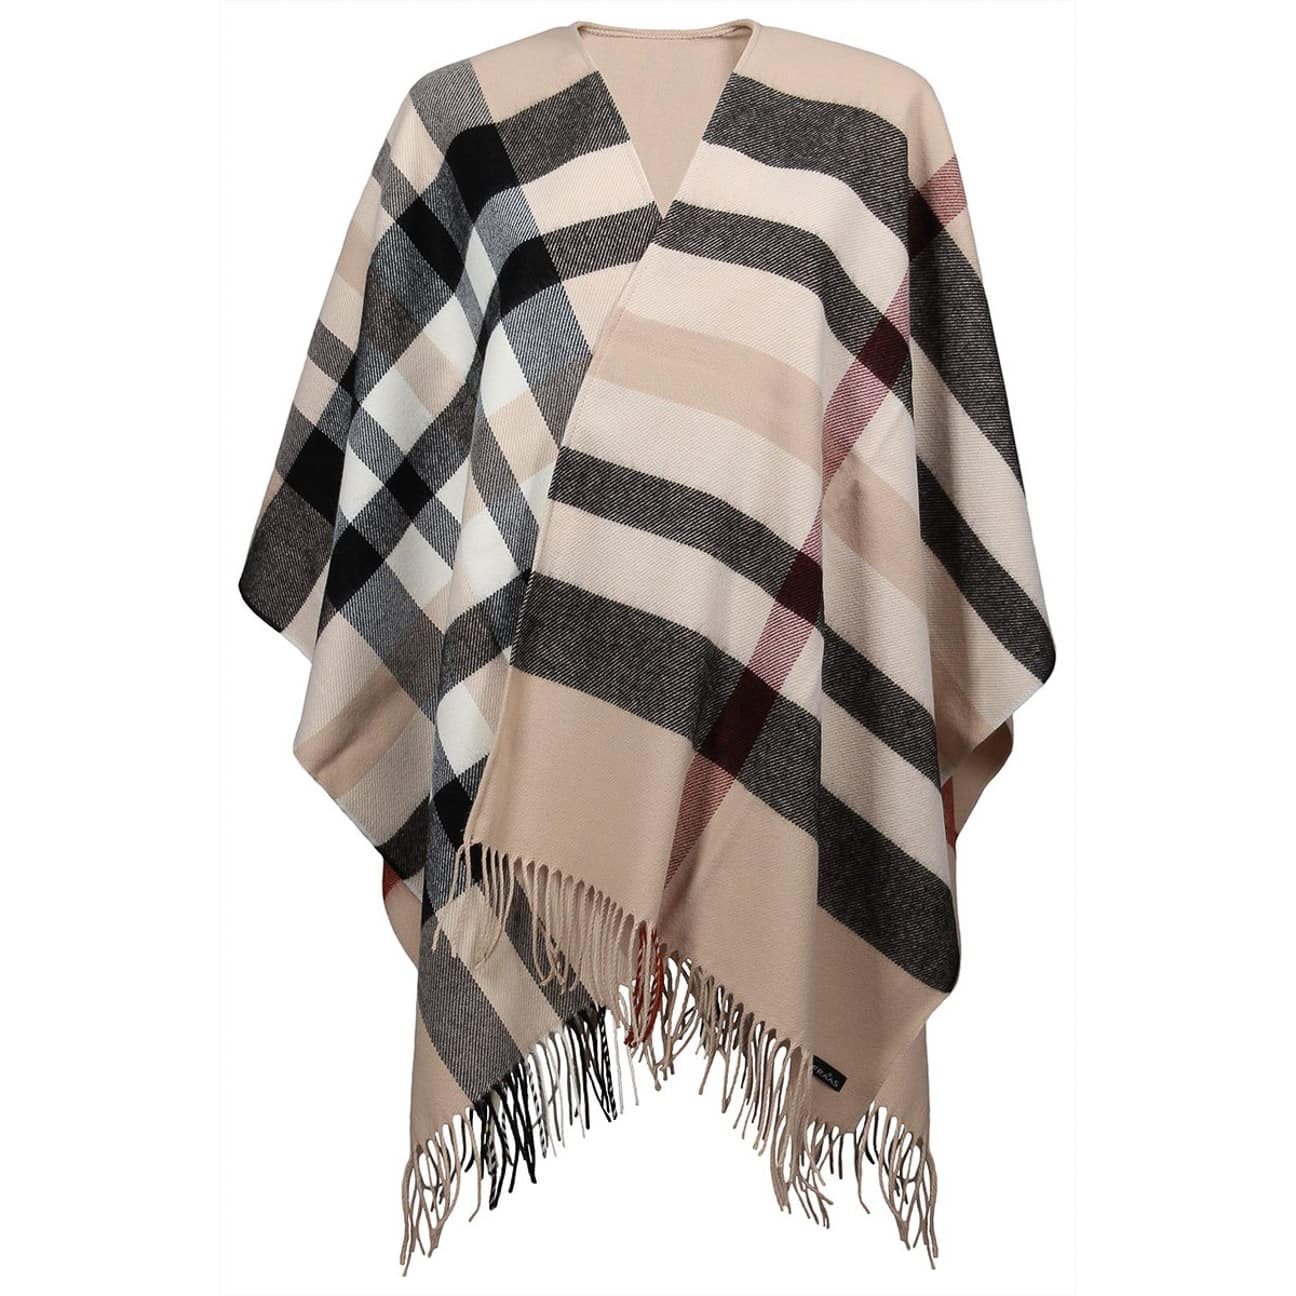 Checked Poncho by Fraas - 49,95